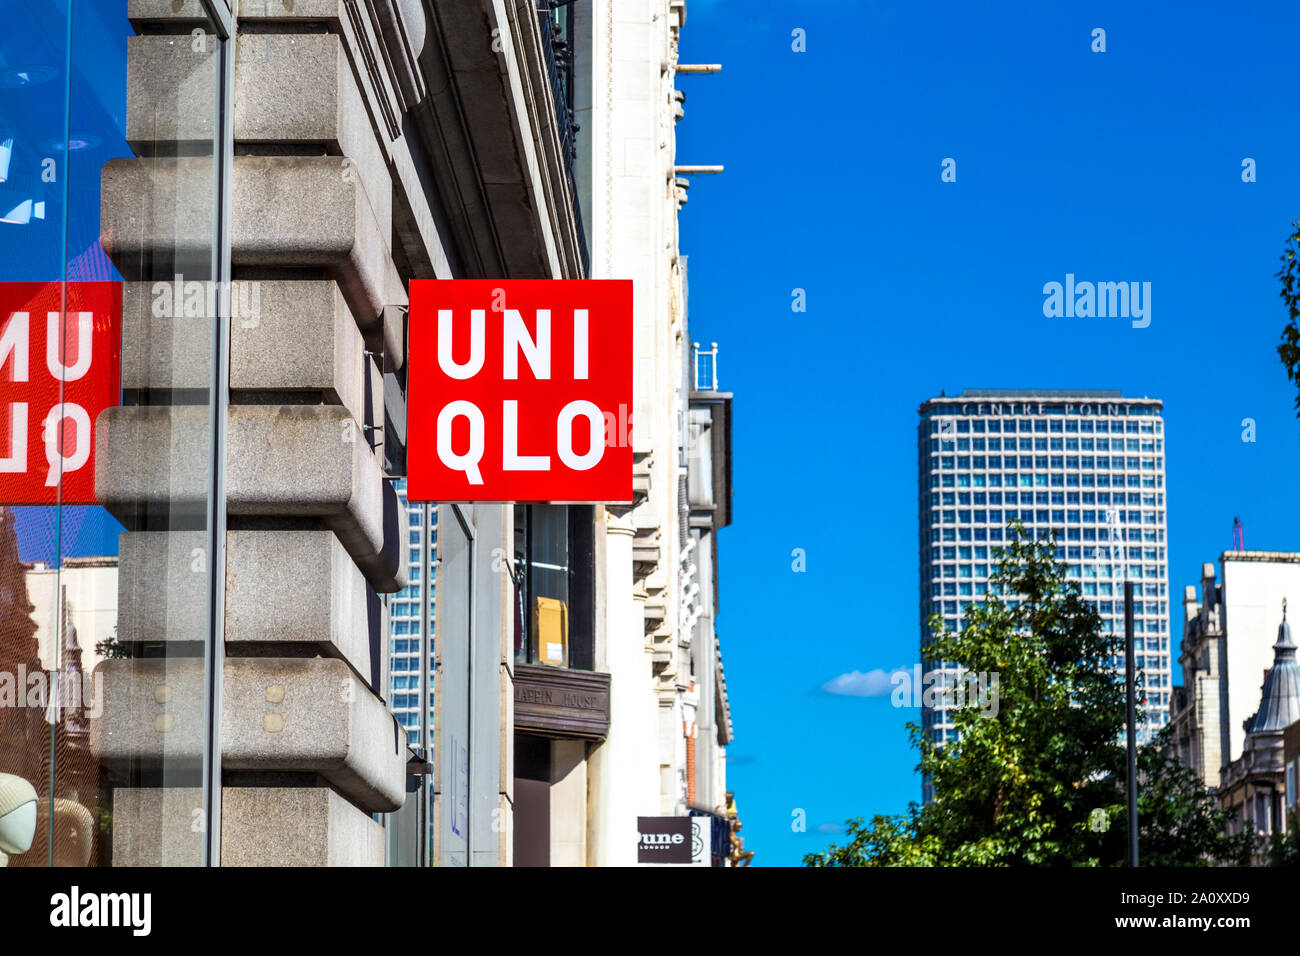 Sign for Uniqlo clothing store on Oxford Street, London, UK Stock Photo